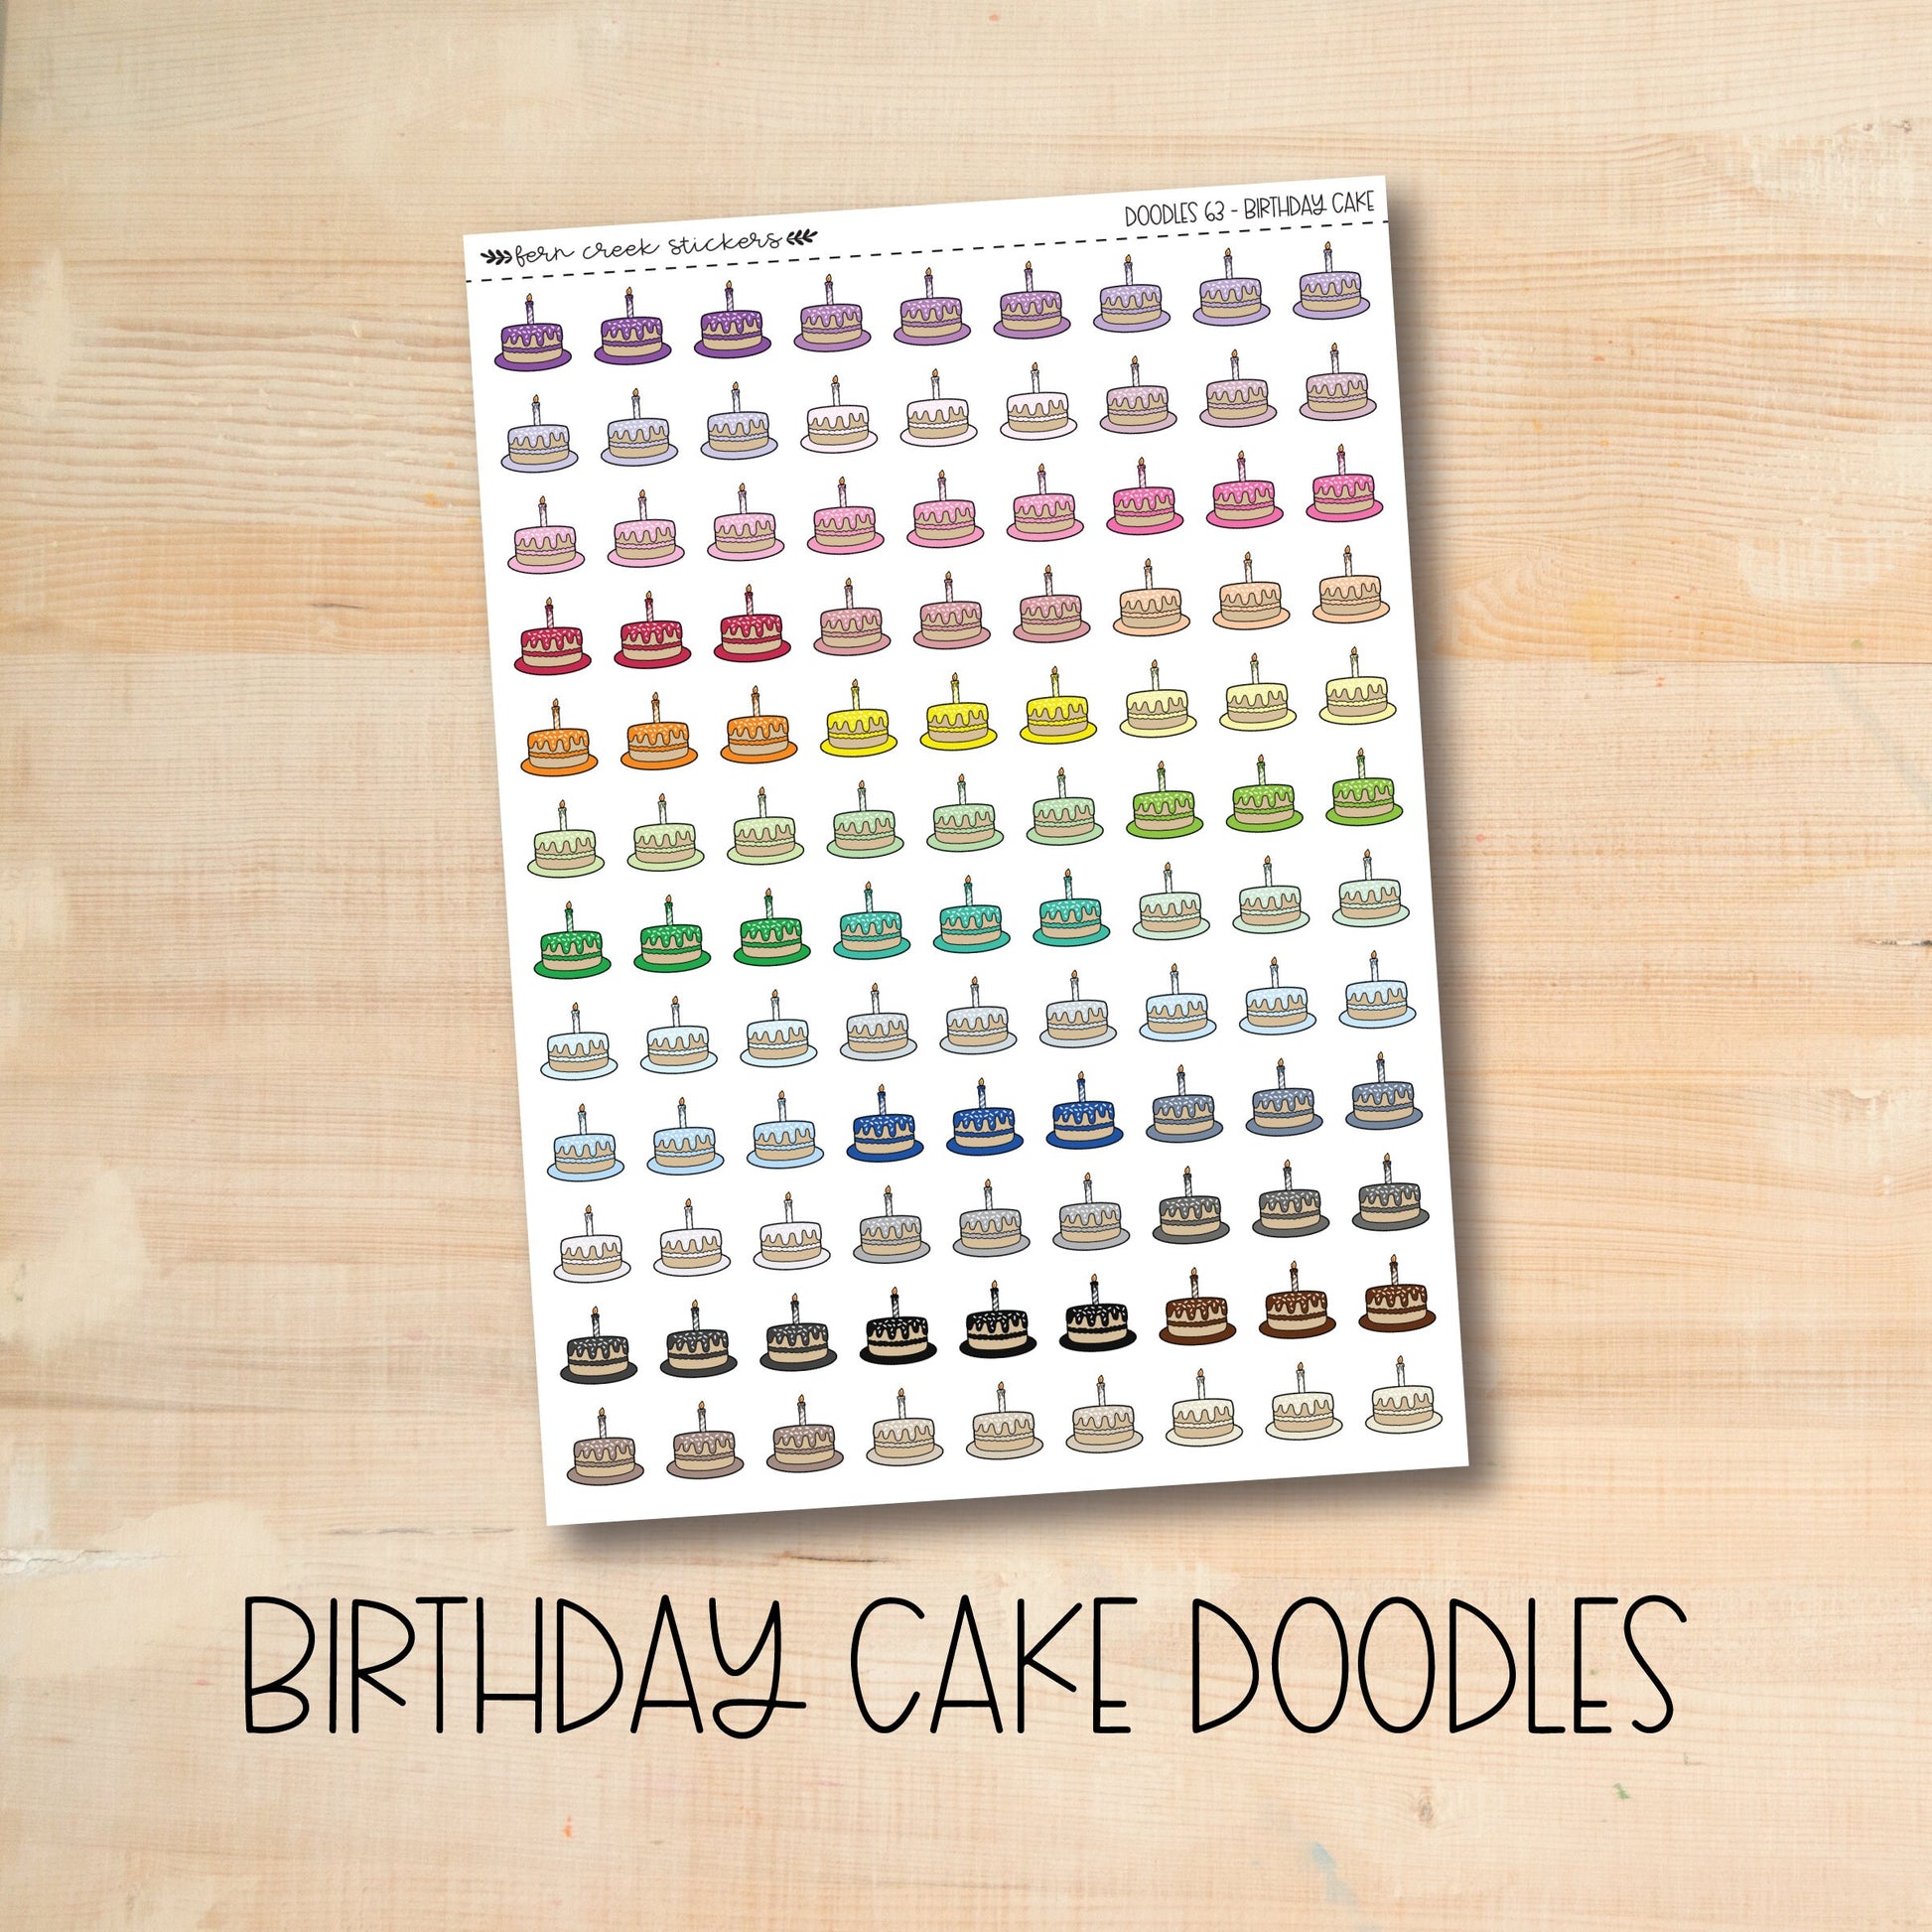 a birthday cake doodles sticker on a wooden table